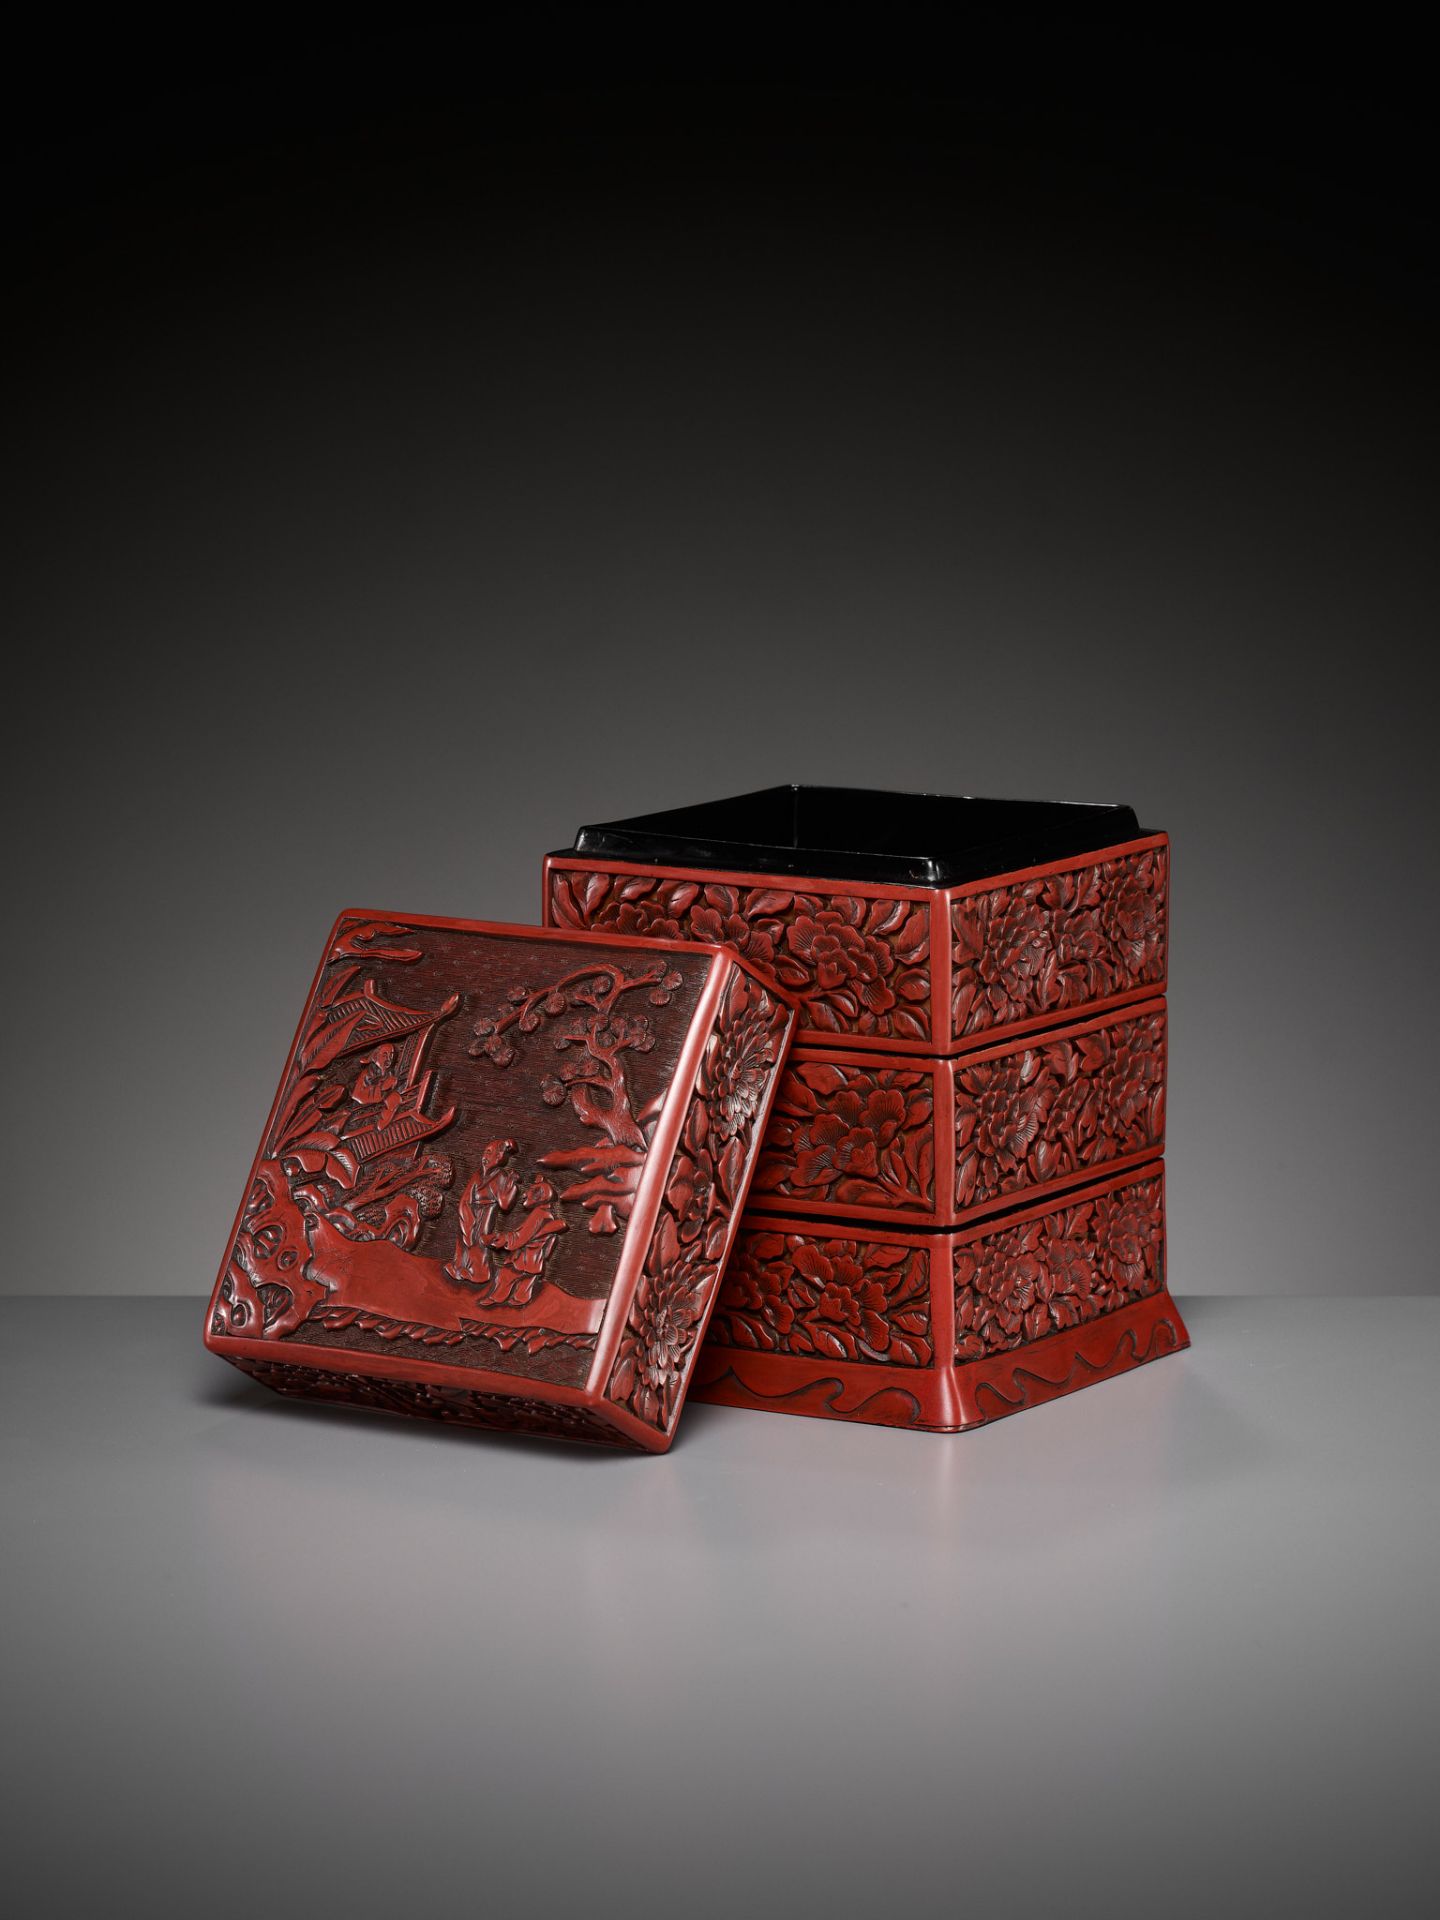 A CINNABAR LACQUER THREE-TIERED BOX AND COVER, LATE YUAN TO MID-MING DYNASTY - Image 12 of 17